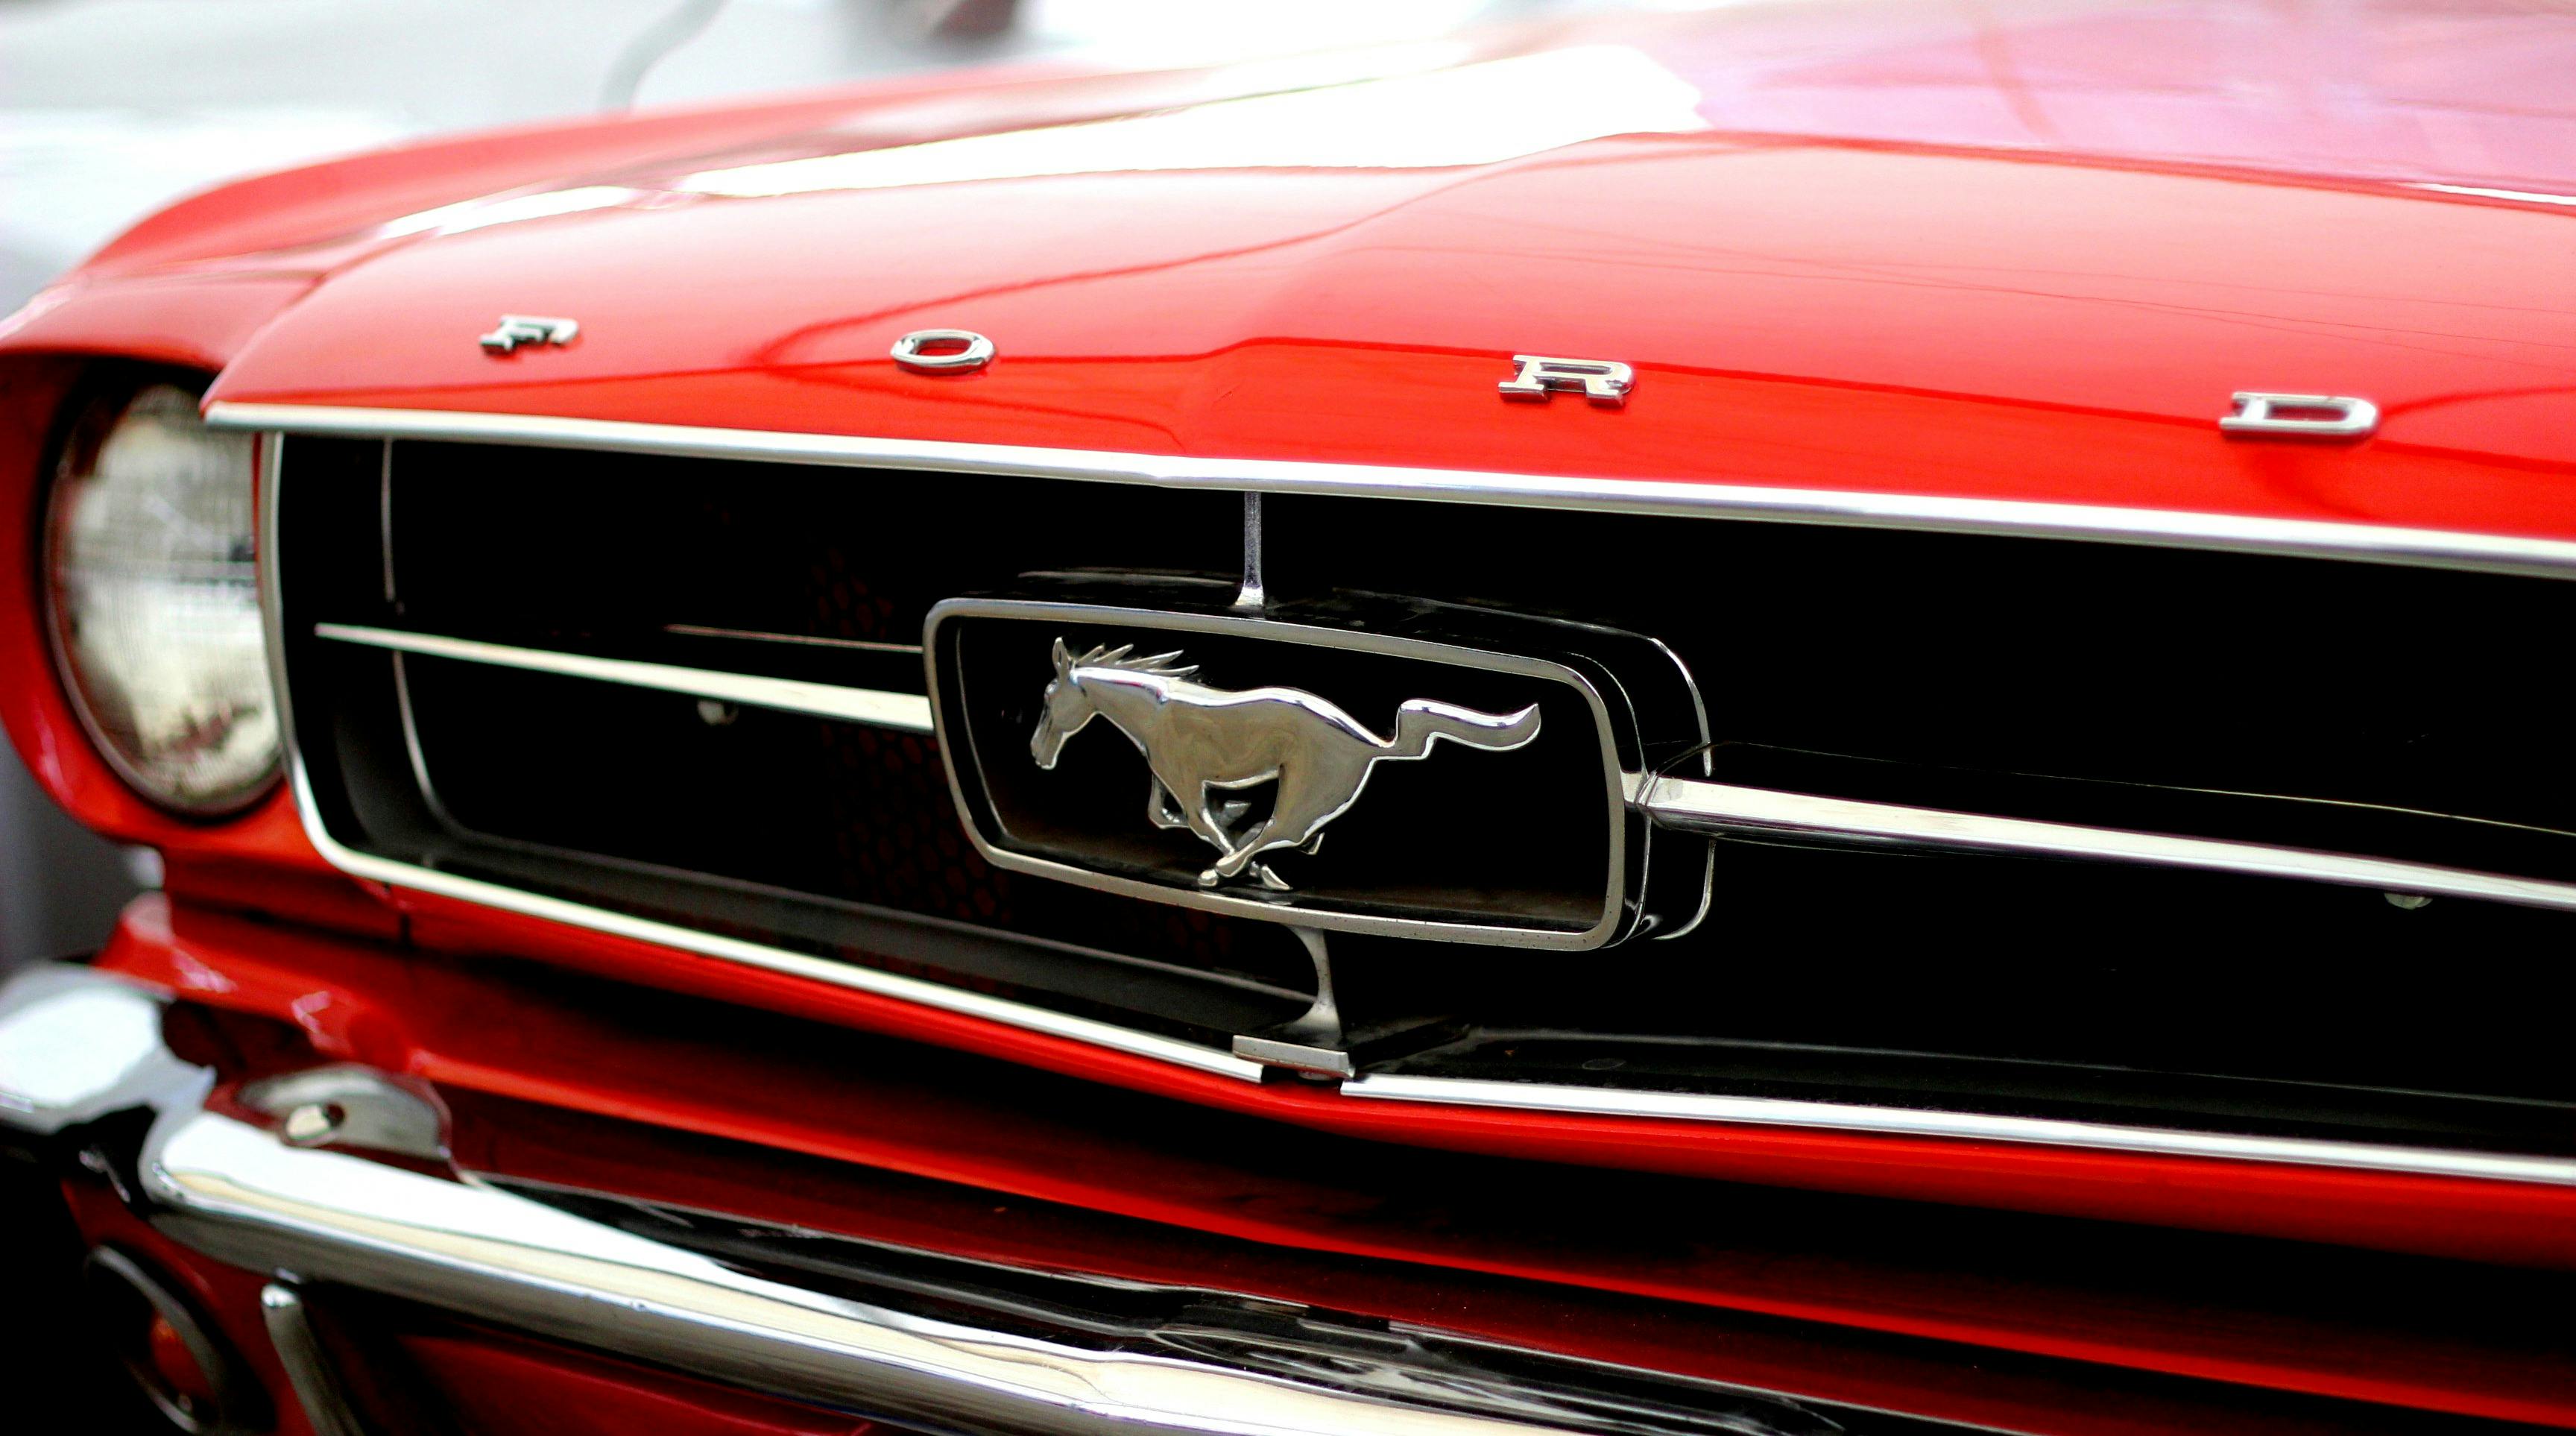 Mustang Photos, Download The BEST Free Mustang Stock Photos & HD Images